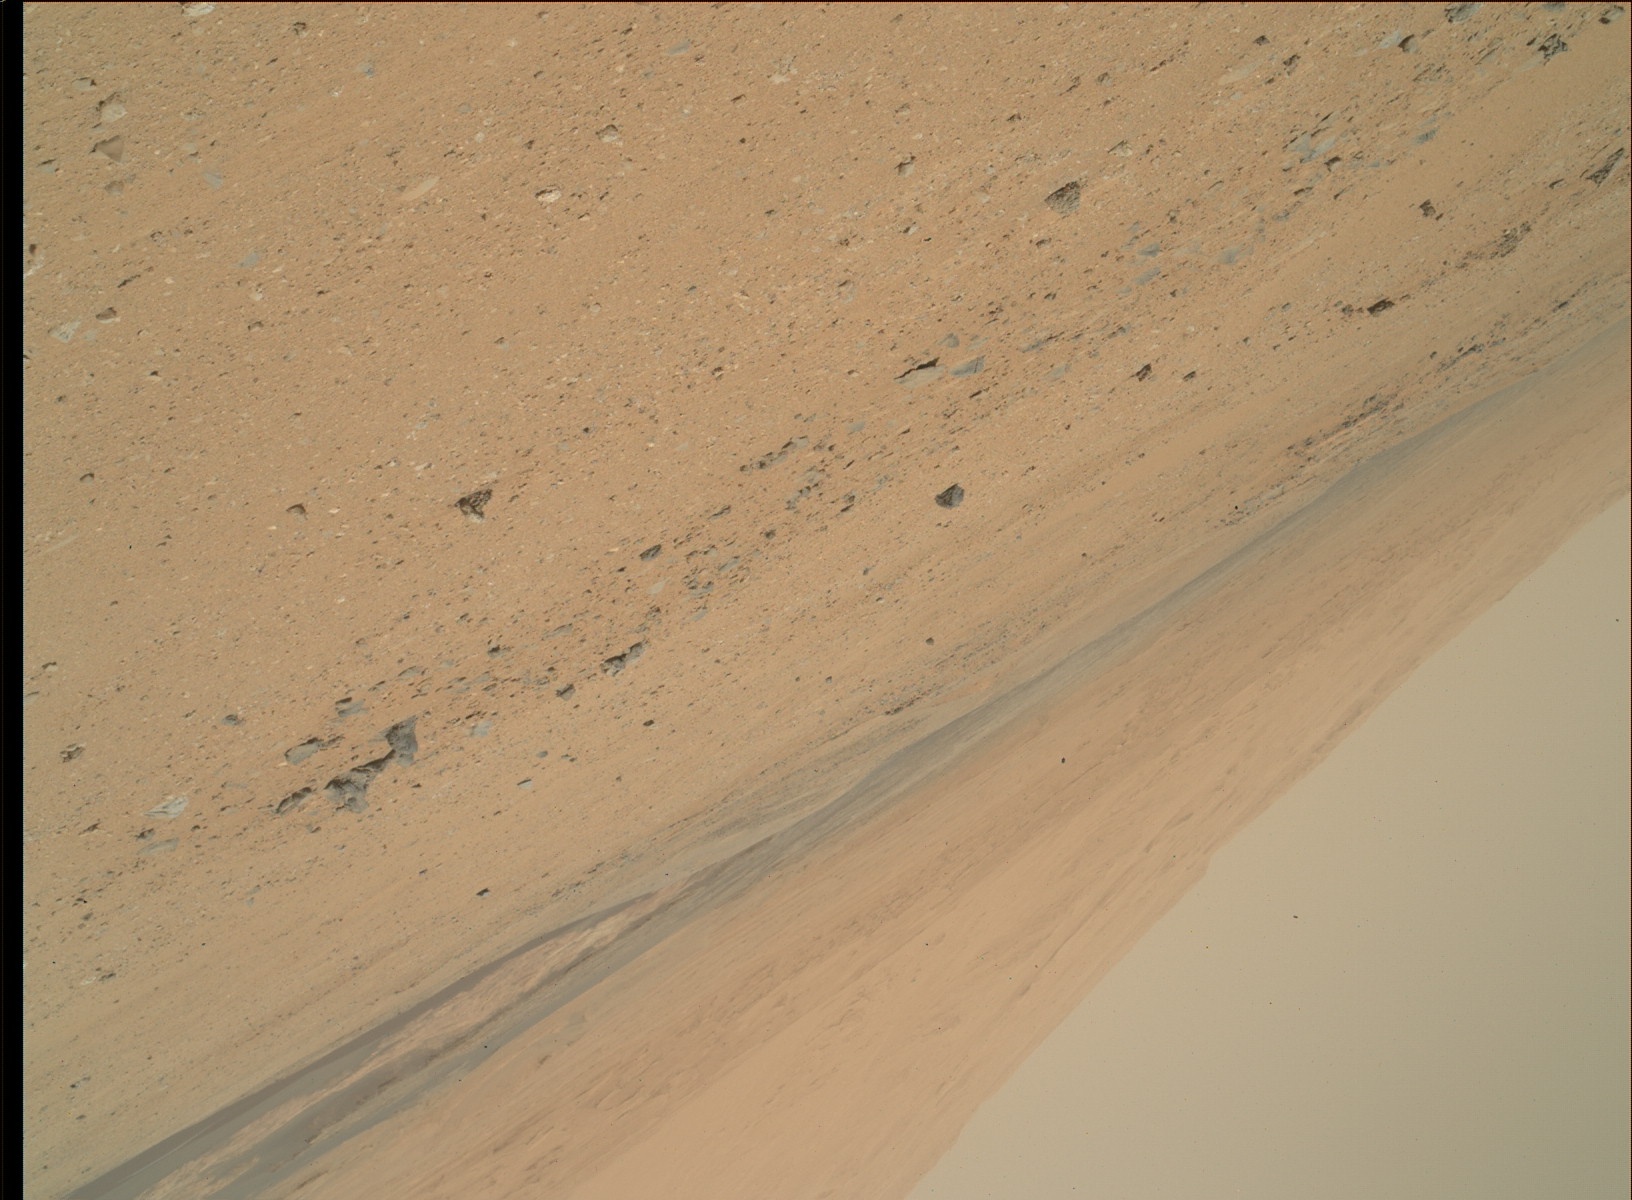 Nasa's Mars rover Curiosity acquired this image using its Mars Hand Lens Imager (MAHLI) on Sol 377